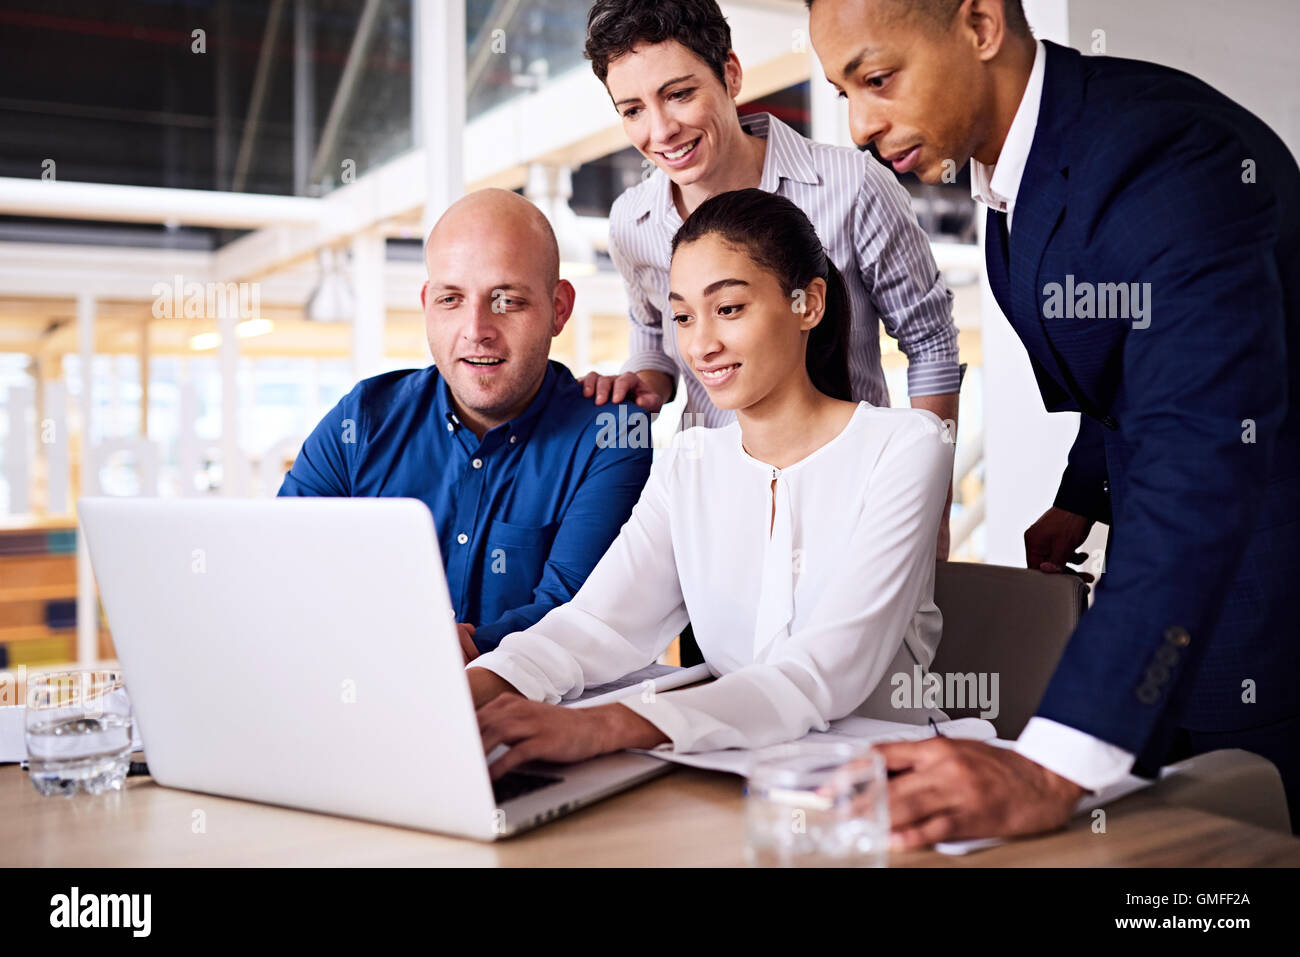 four well dressed diverse entrepreneurs looking at a laptop screen Stock Photo